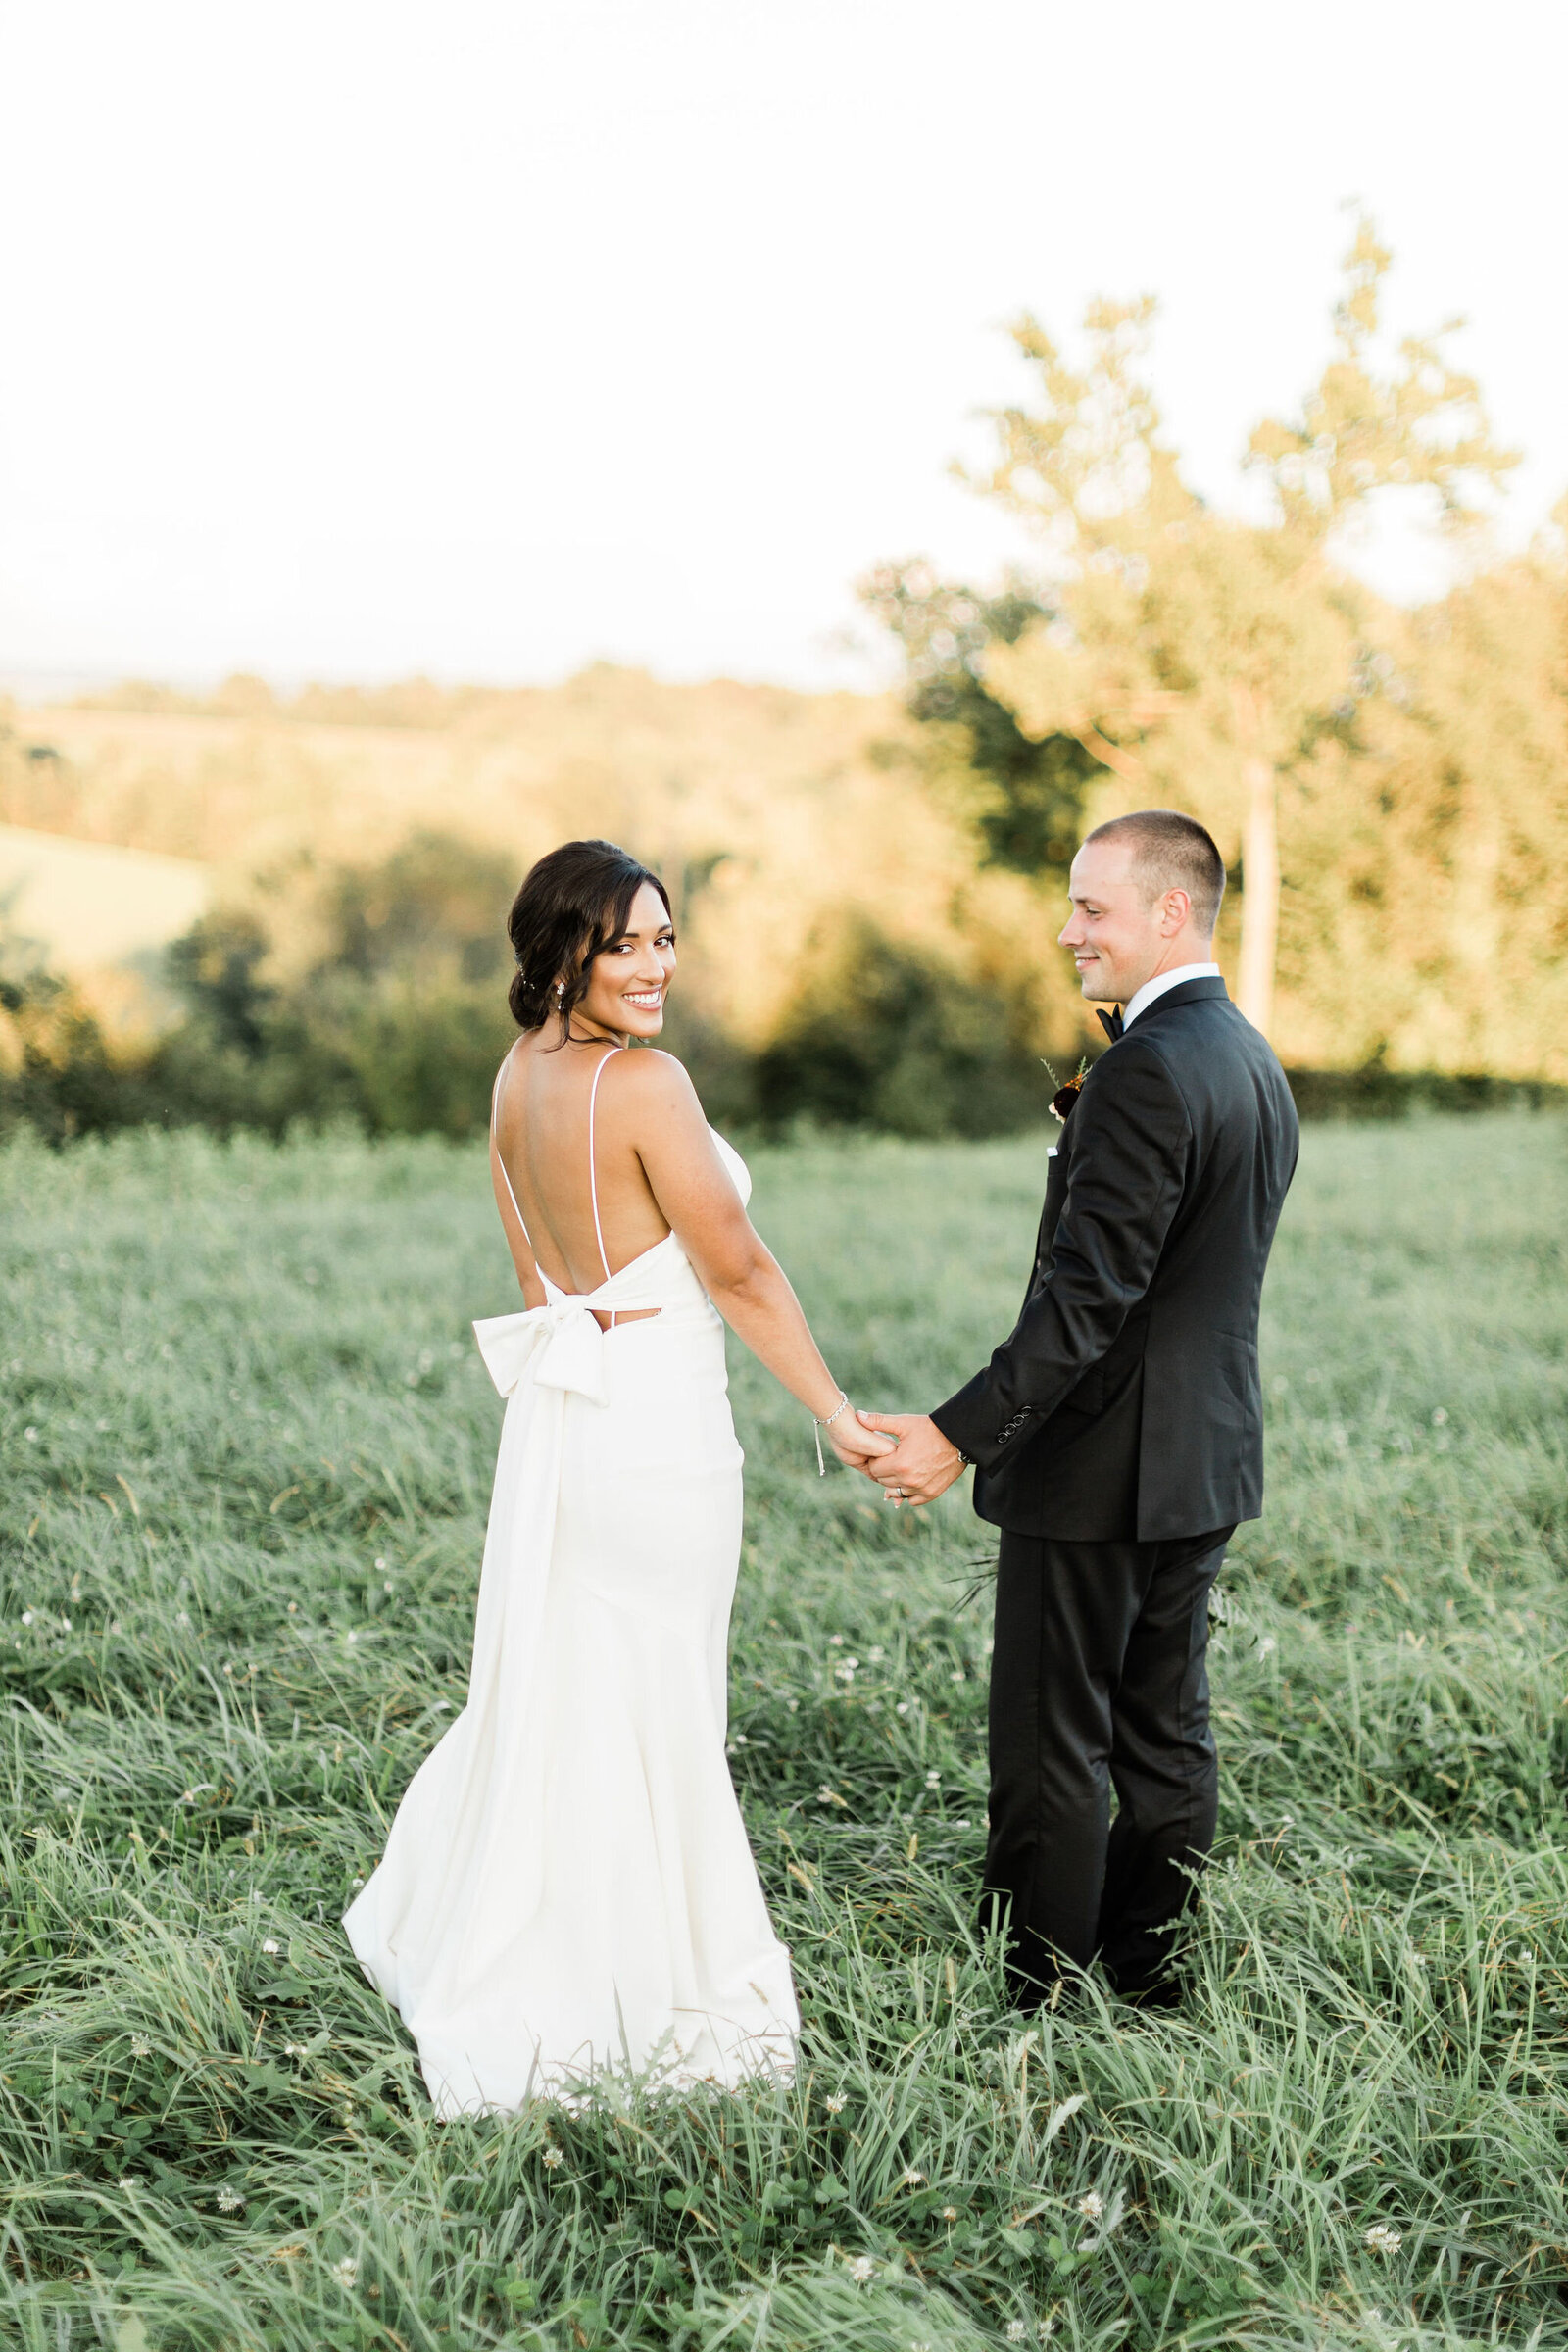 Stunning Hilltop Wedding Photos | Cleveland OH | The Axtells Photo and Film